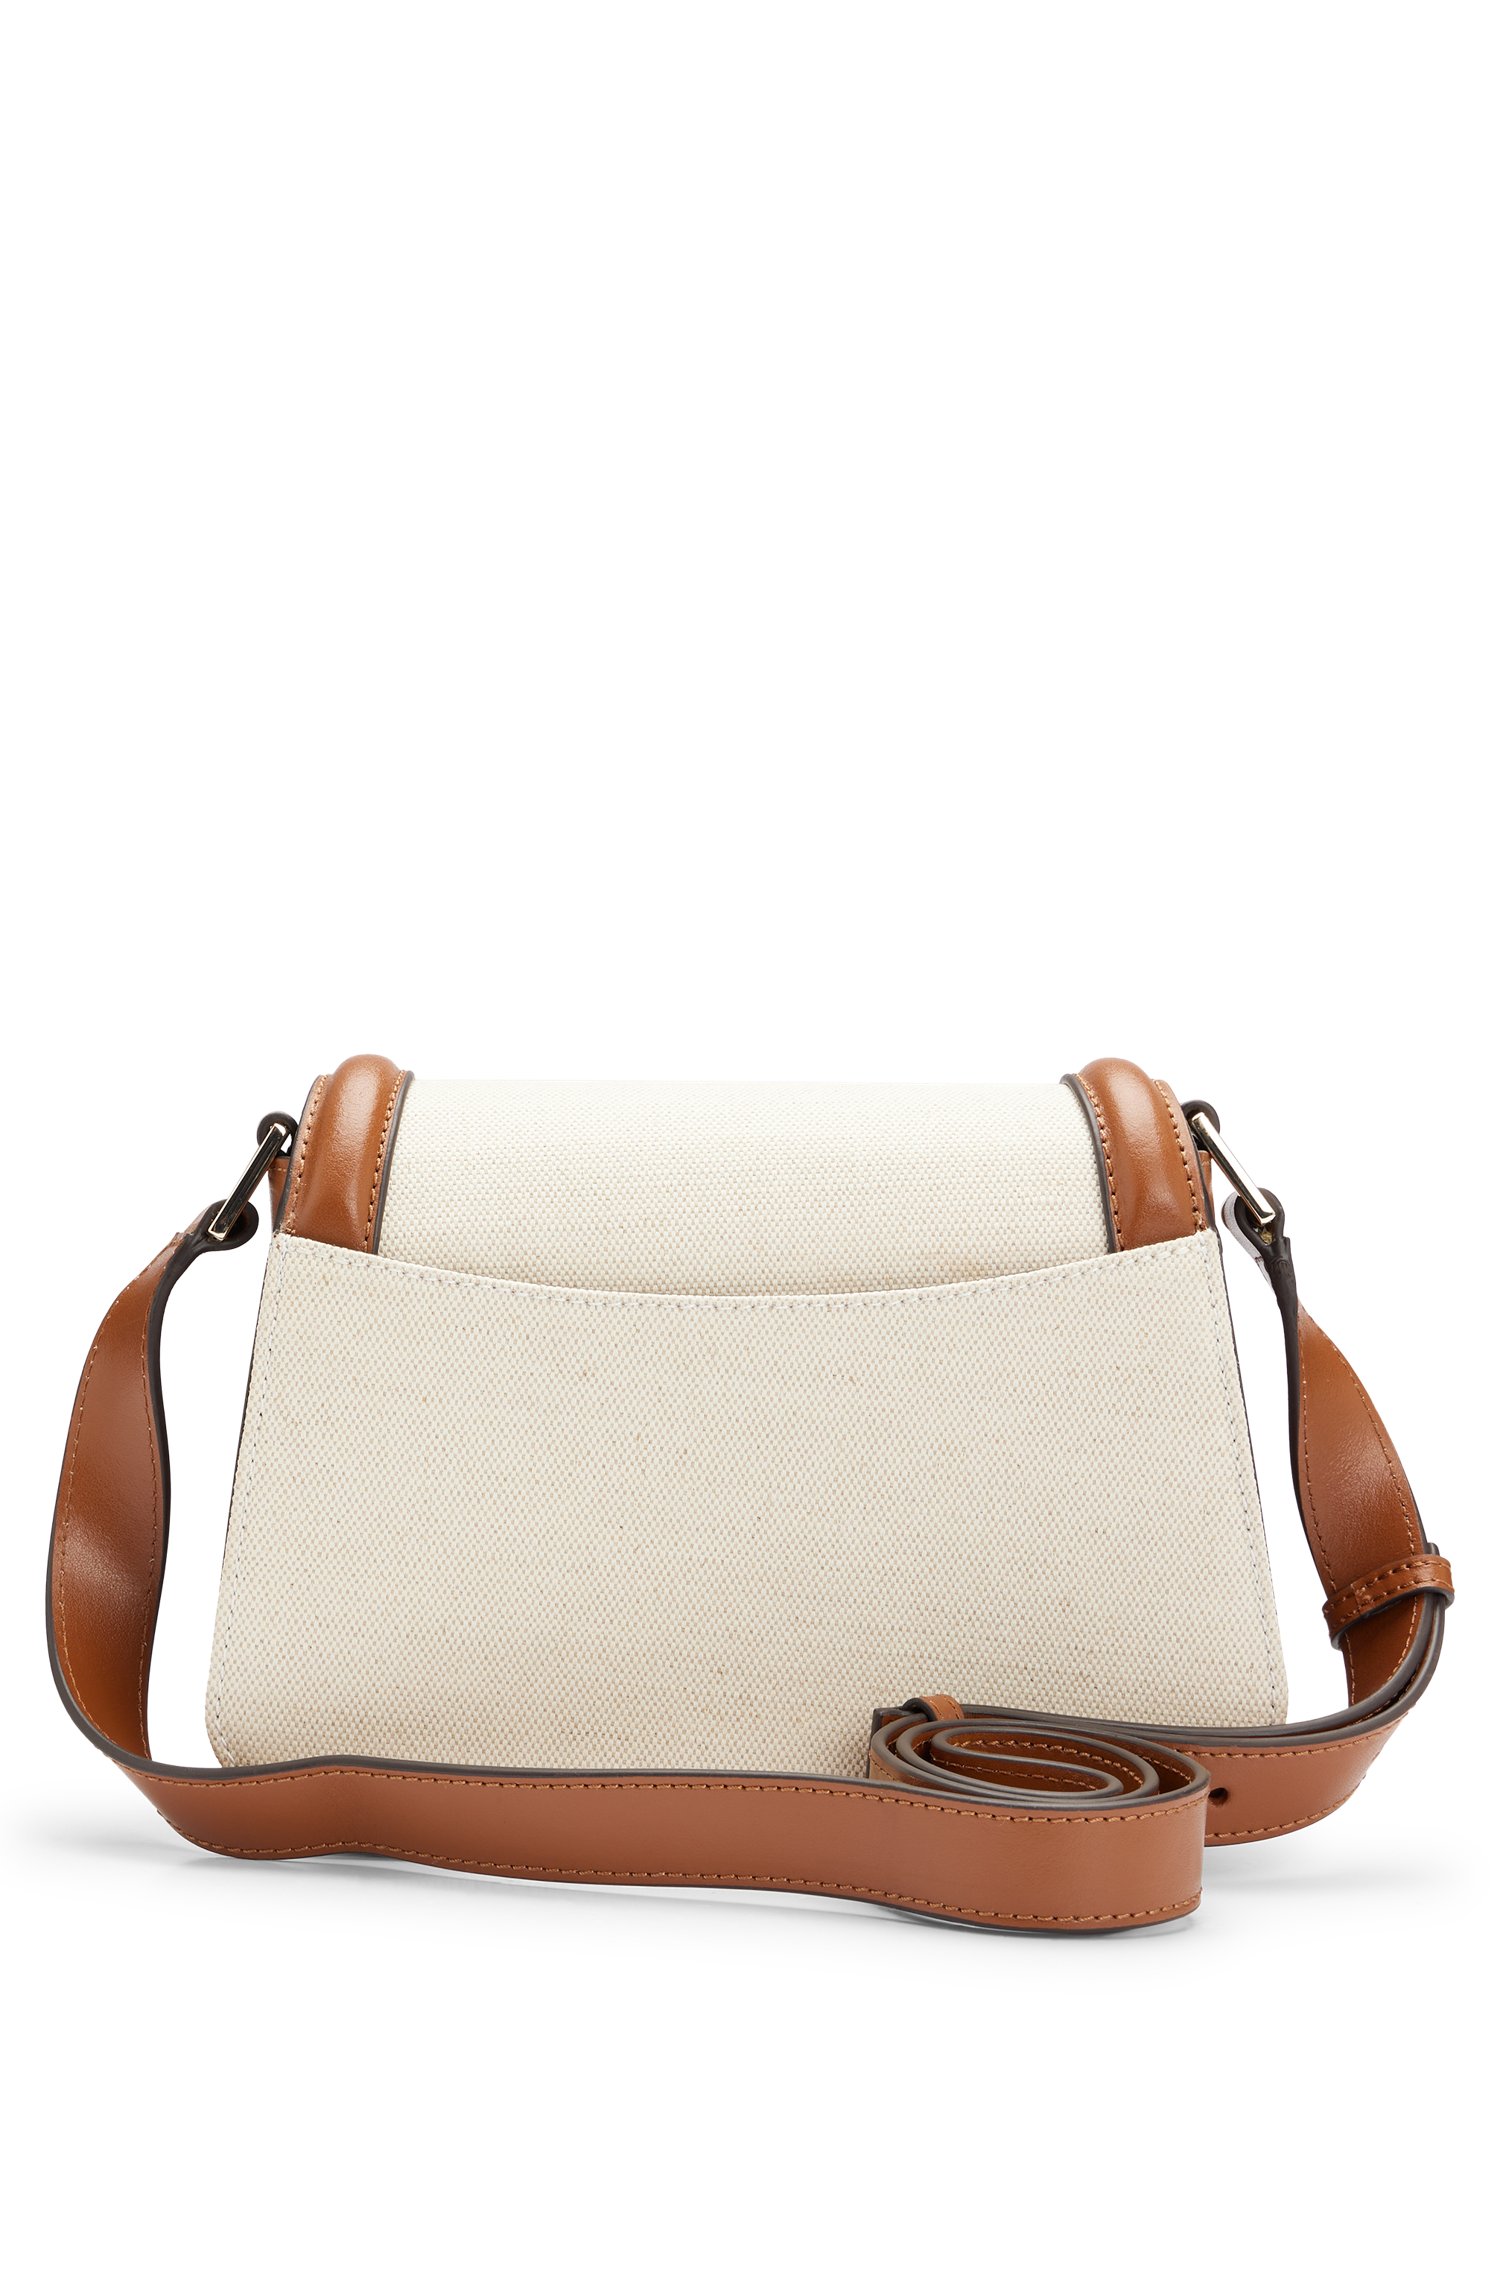 Saddle bag with leather trims